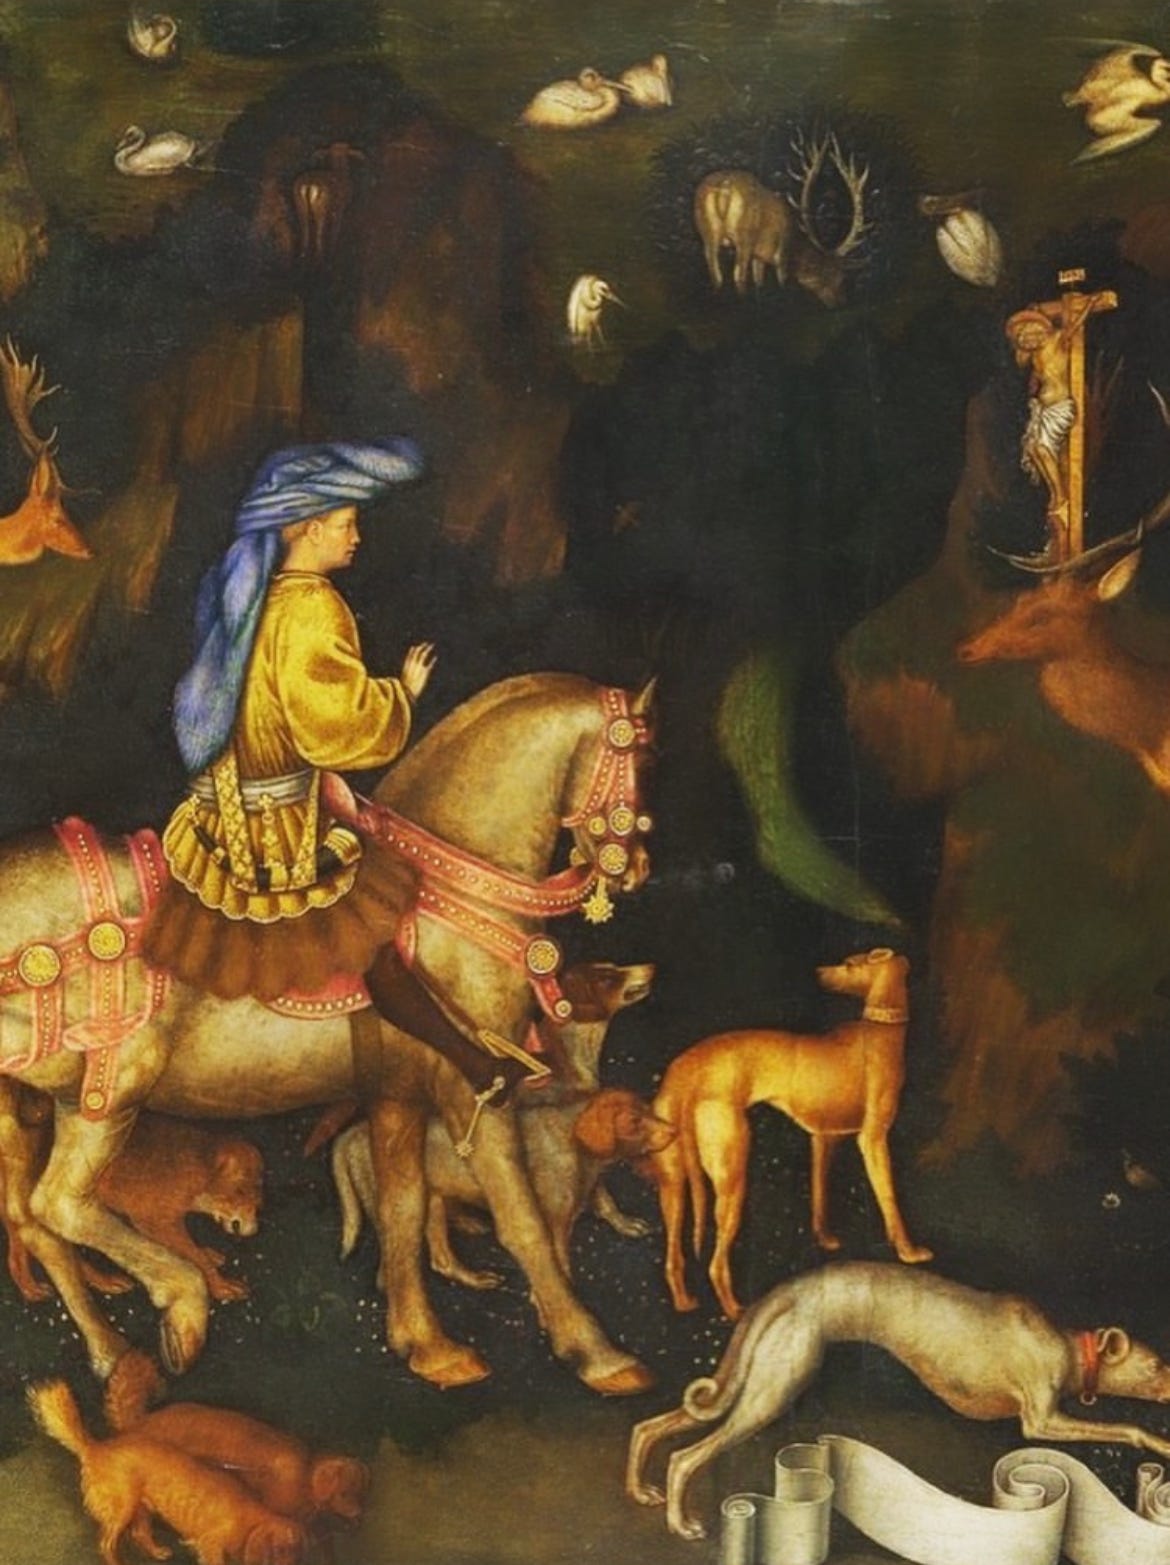 The Vision of St Eustace, Pisanello, 1438